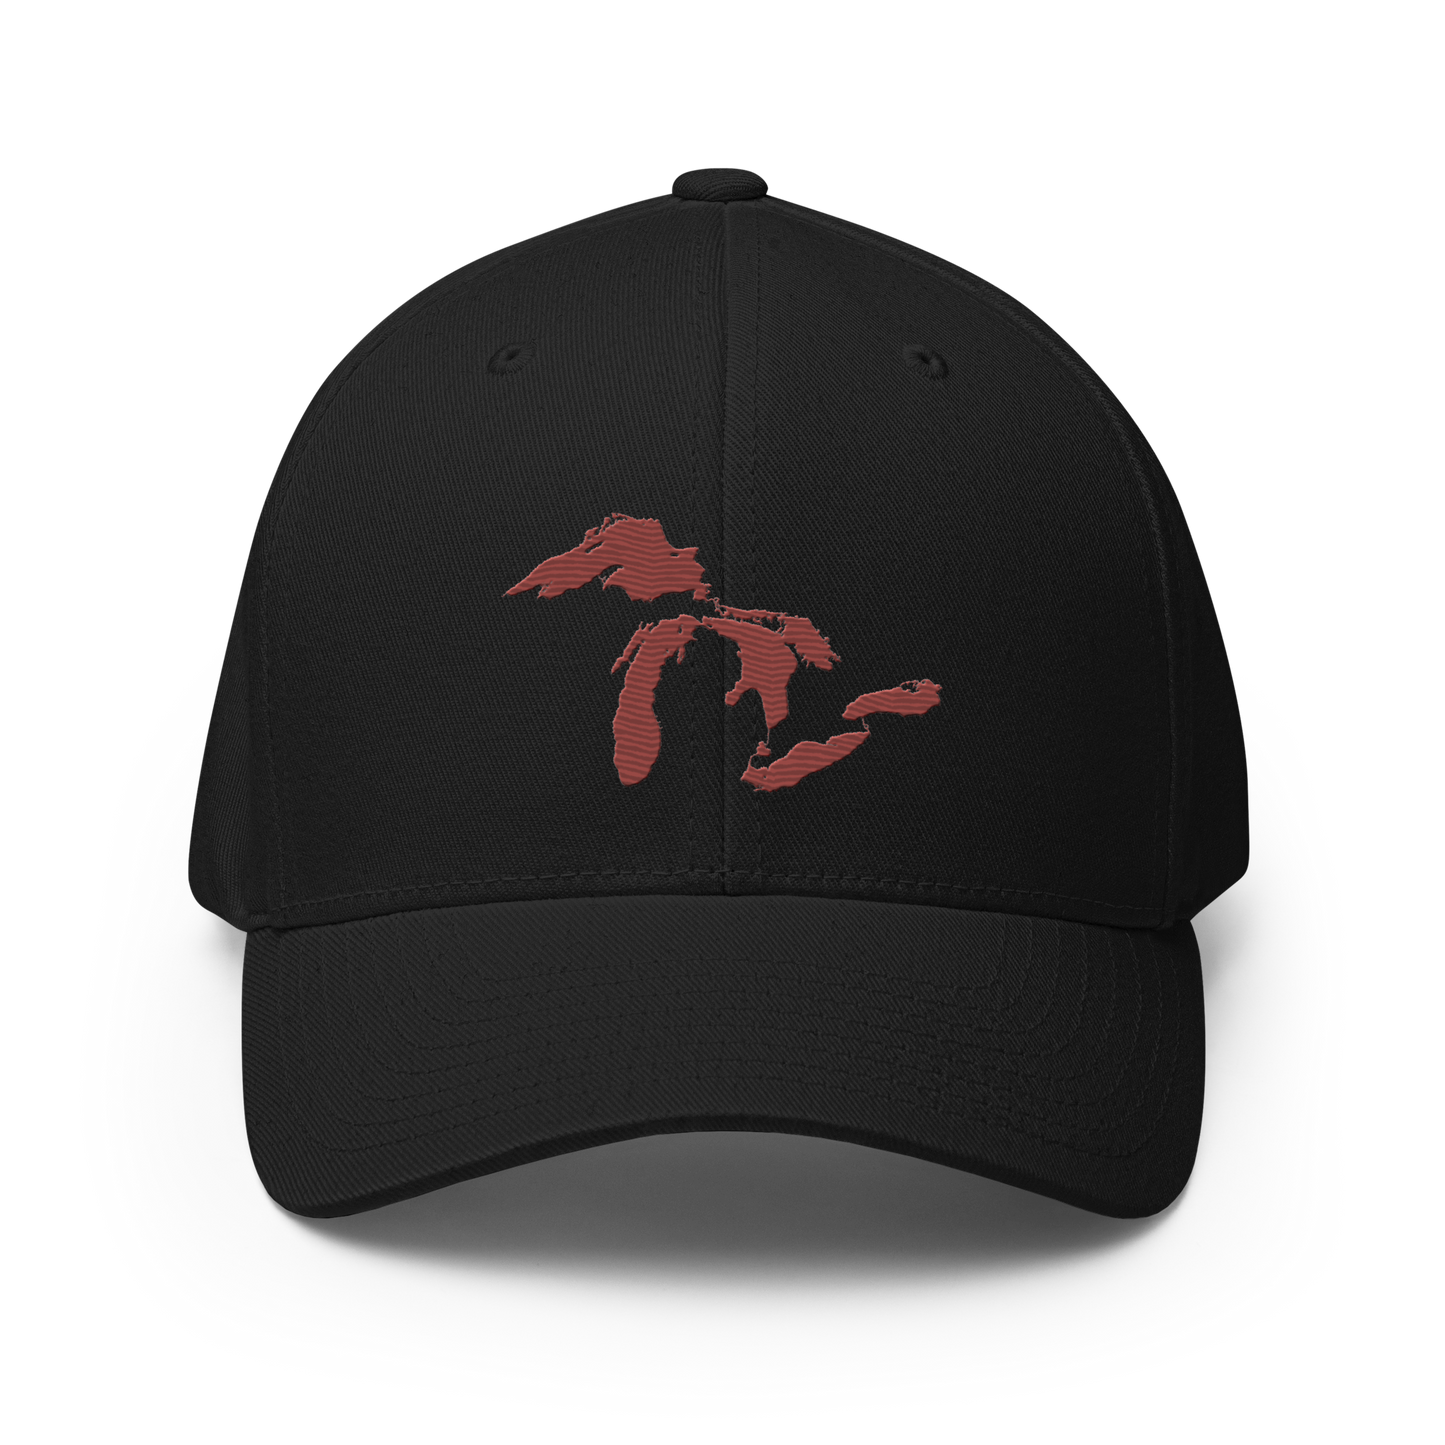 Great Lakes Fitted Baseball Cap | Ore Dock Red